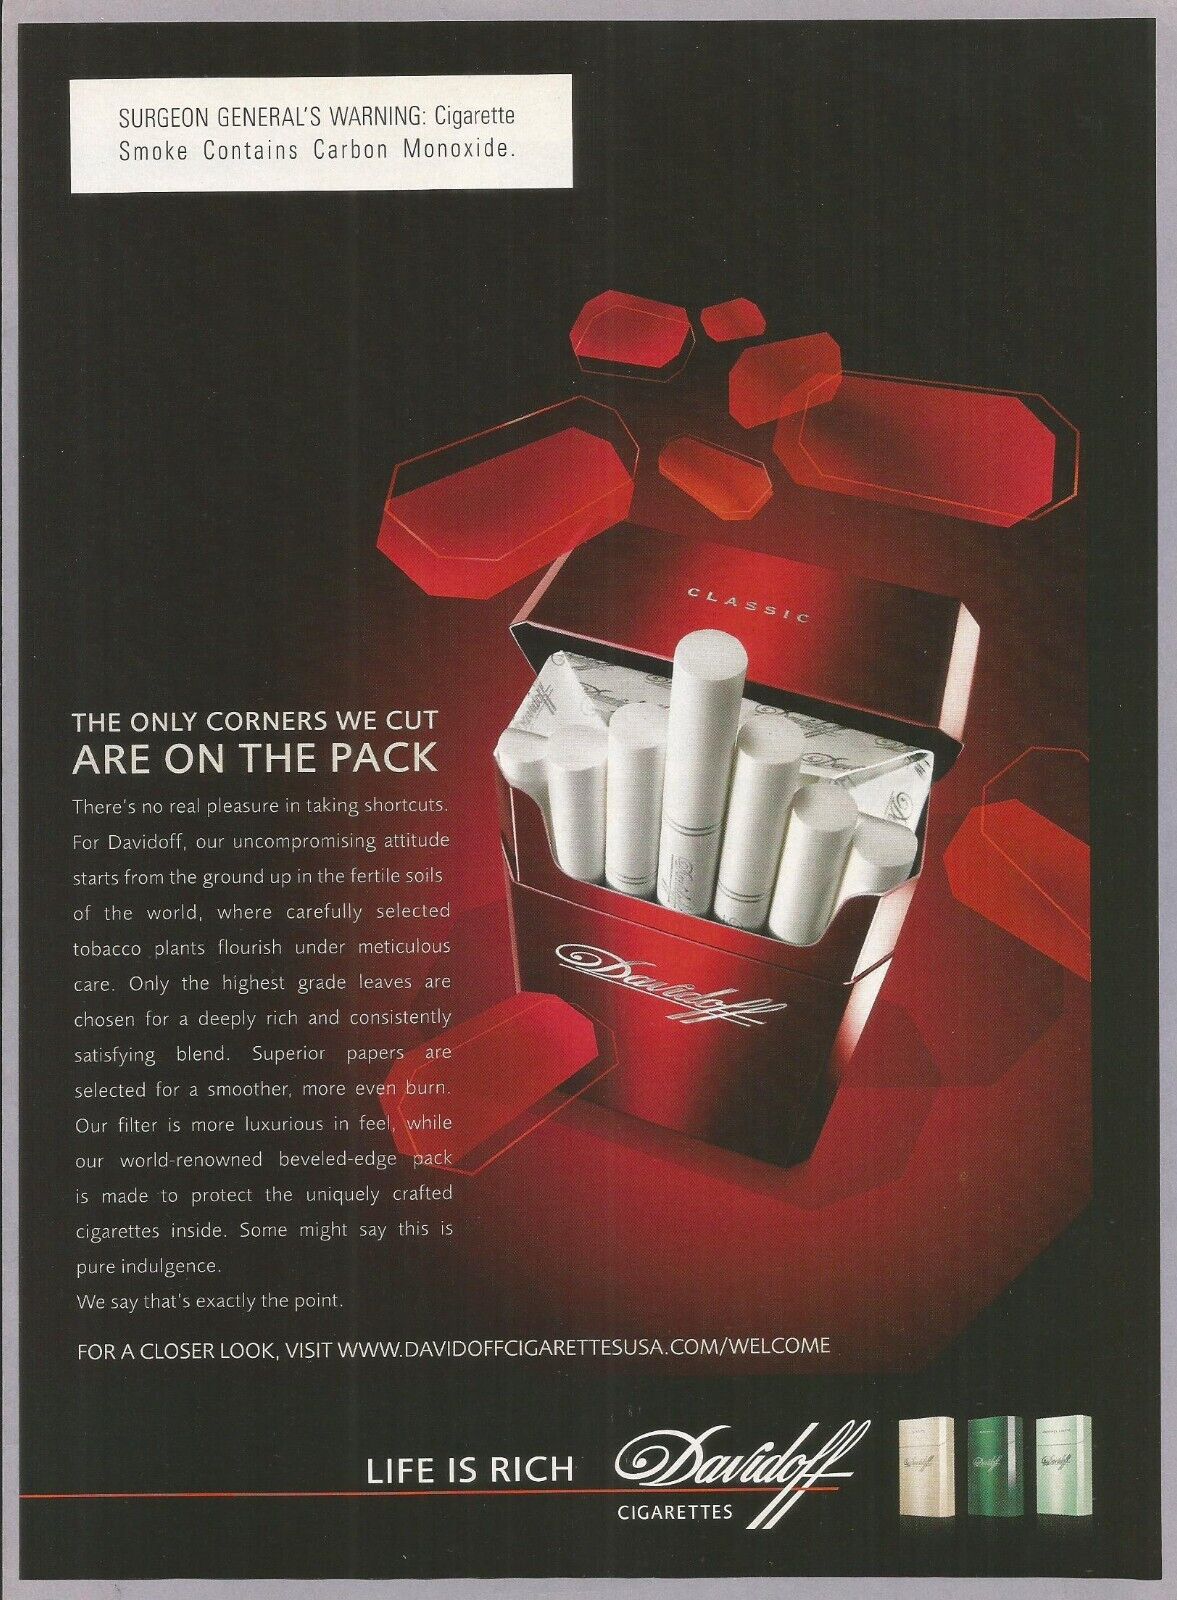 DAVIDOFF CLASSIC Cigarettes-The Only Corners Cut are on the Pack-2008 Print Ad